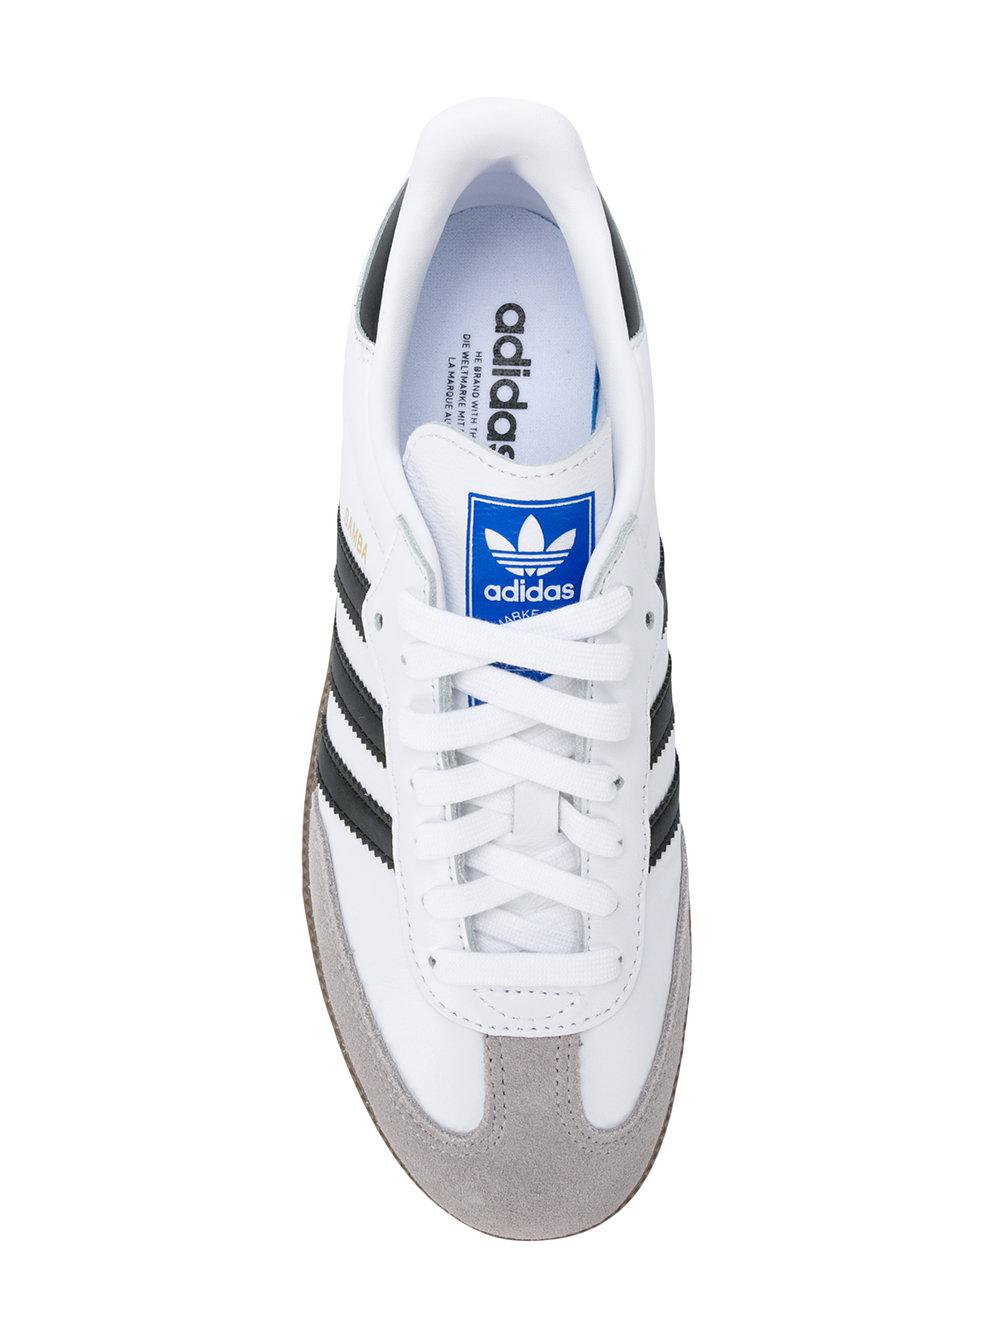 adidas Samba Og Leather & Suede Lace Up Sneakers in White | Lyst